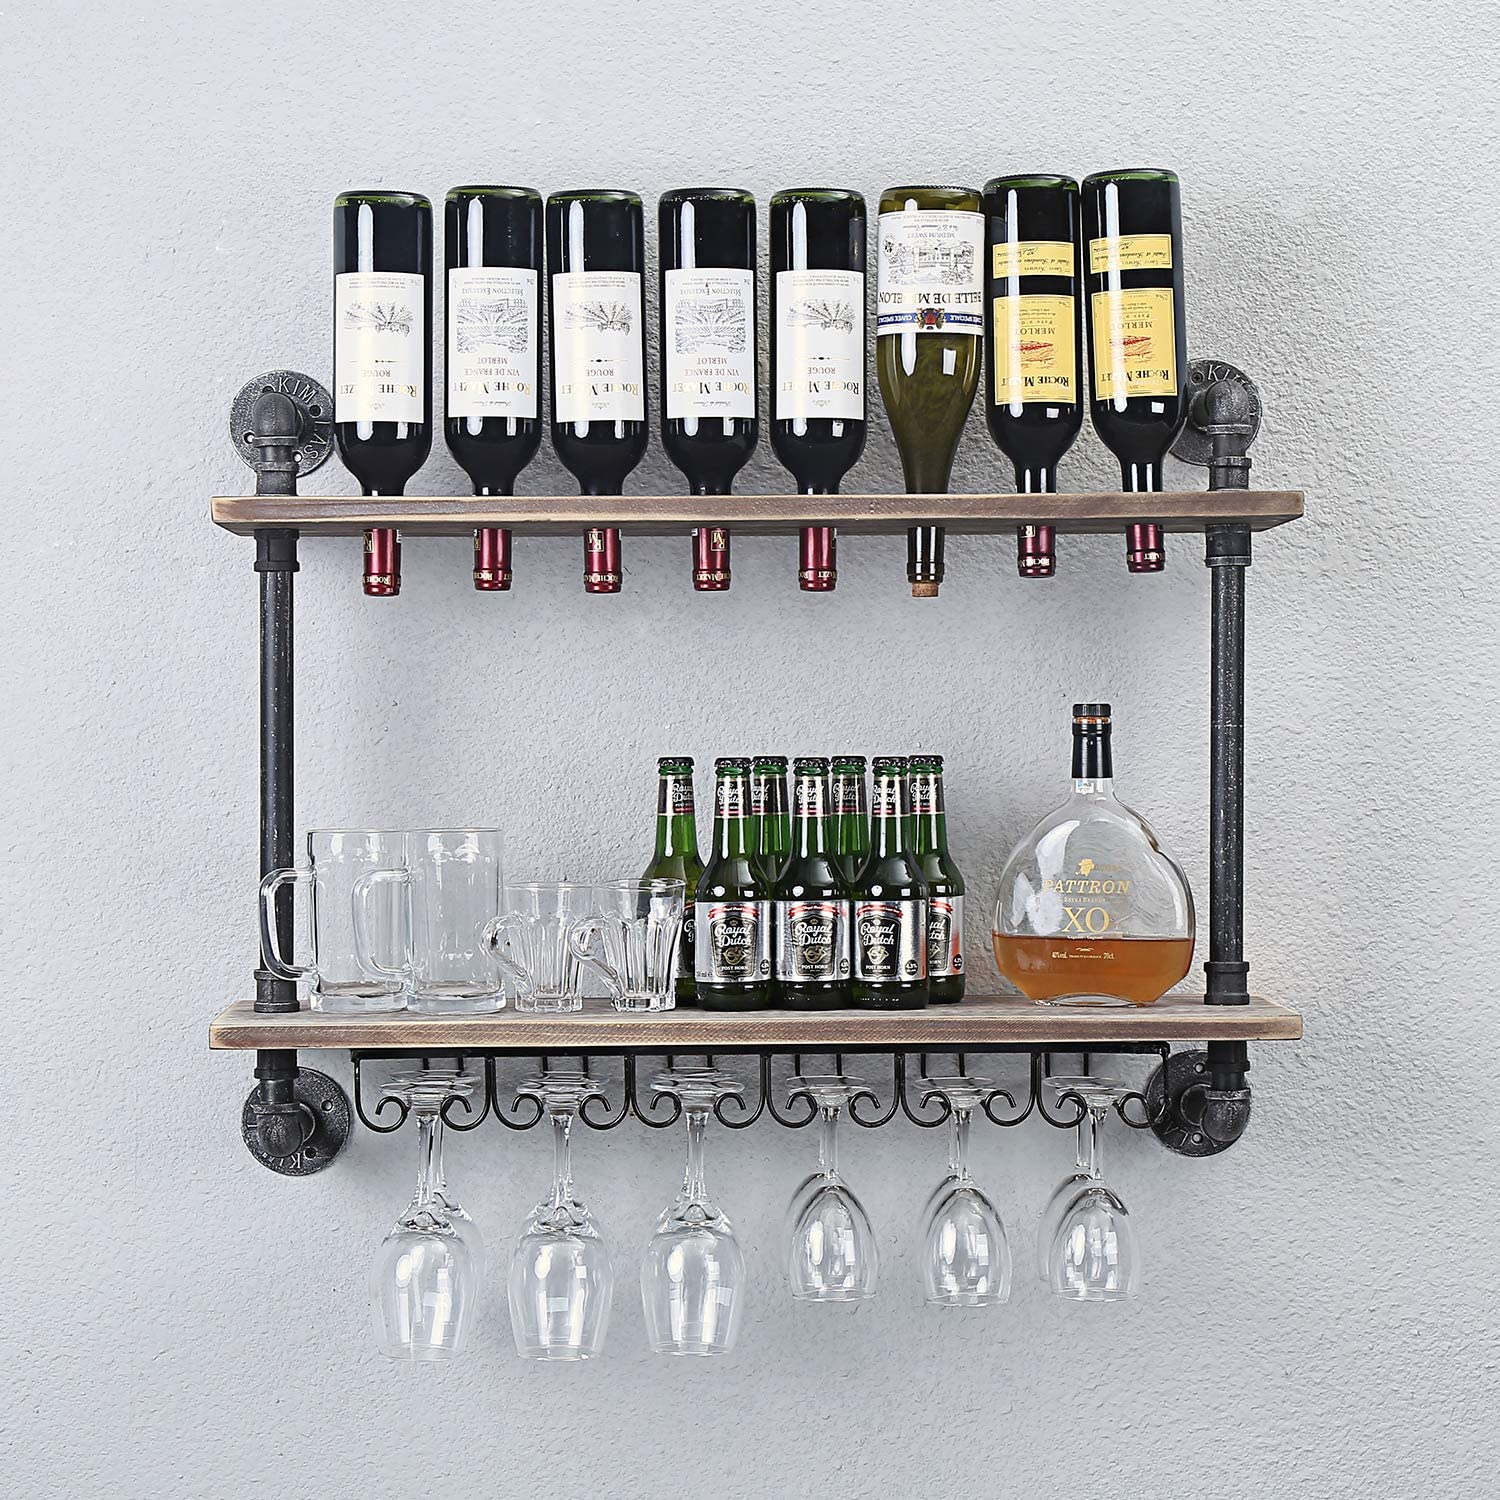 https://www.ekrhome.com/industrial-rustic-wall-mounted-wine-racks-with-glass-holder-pipe-hanging-wine-rack2-tiers-wood-shelf-floating-shelveshome-room-living-room-kitchen-decor-display-rack-24inch-product/